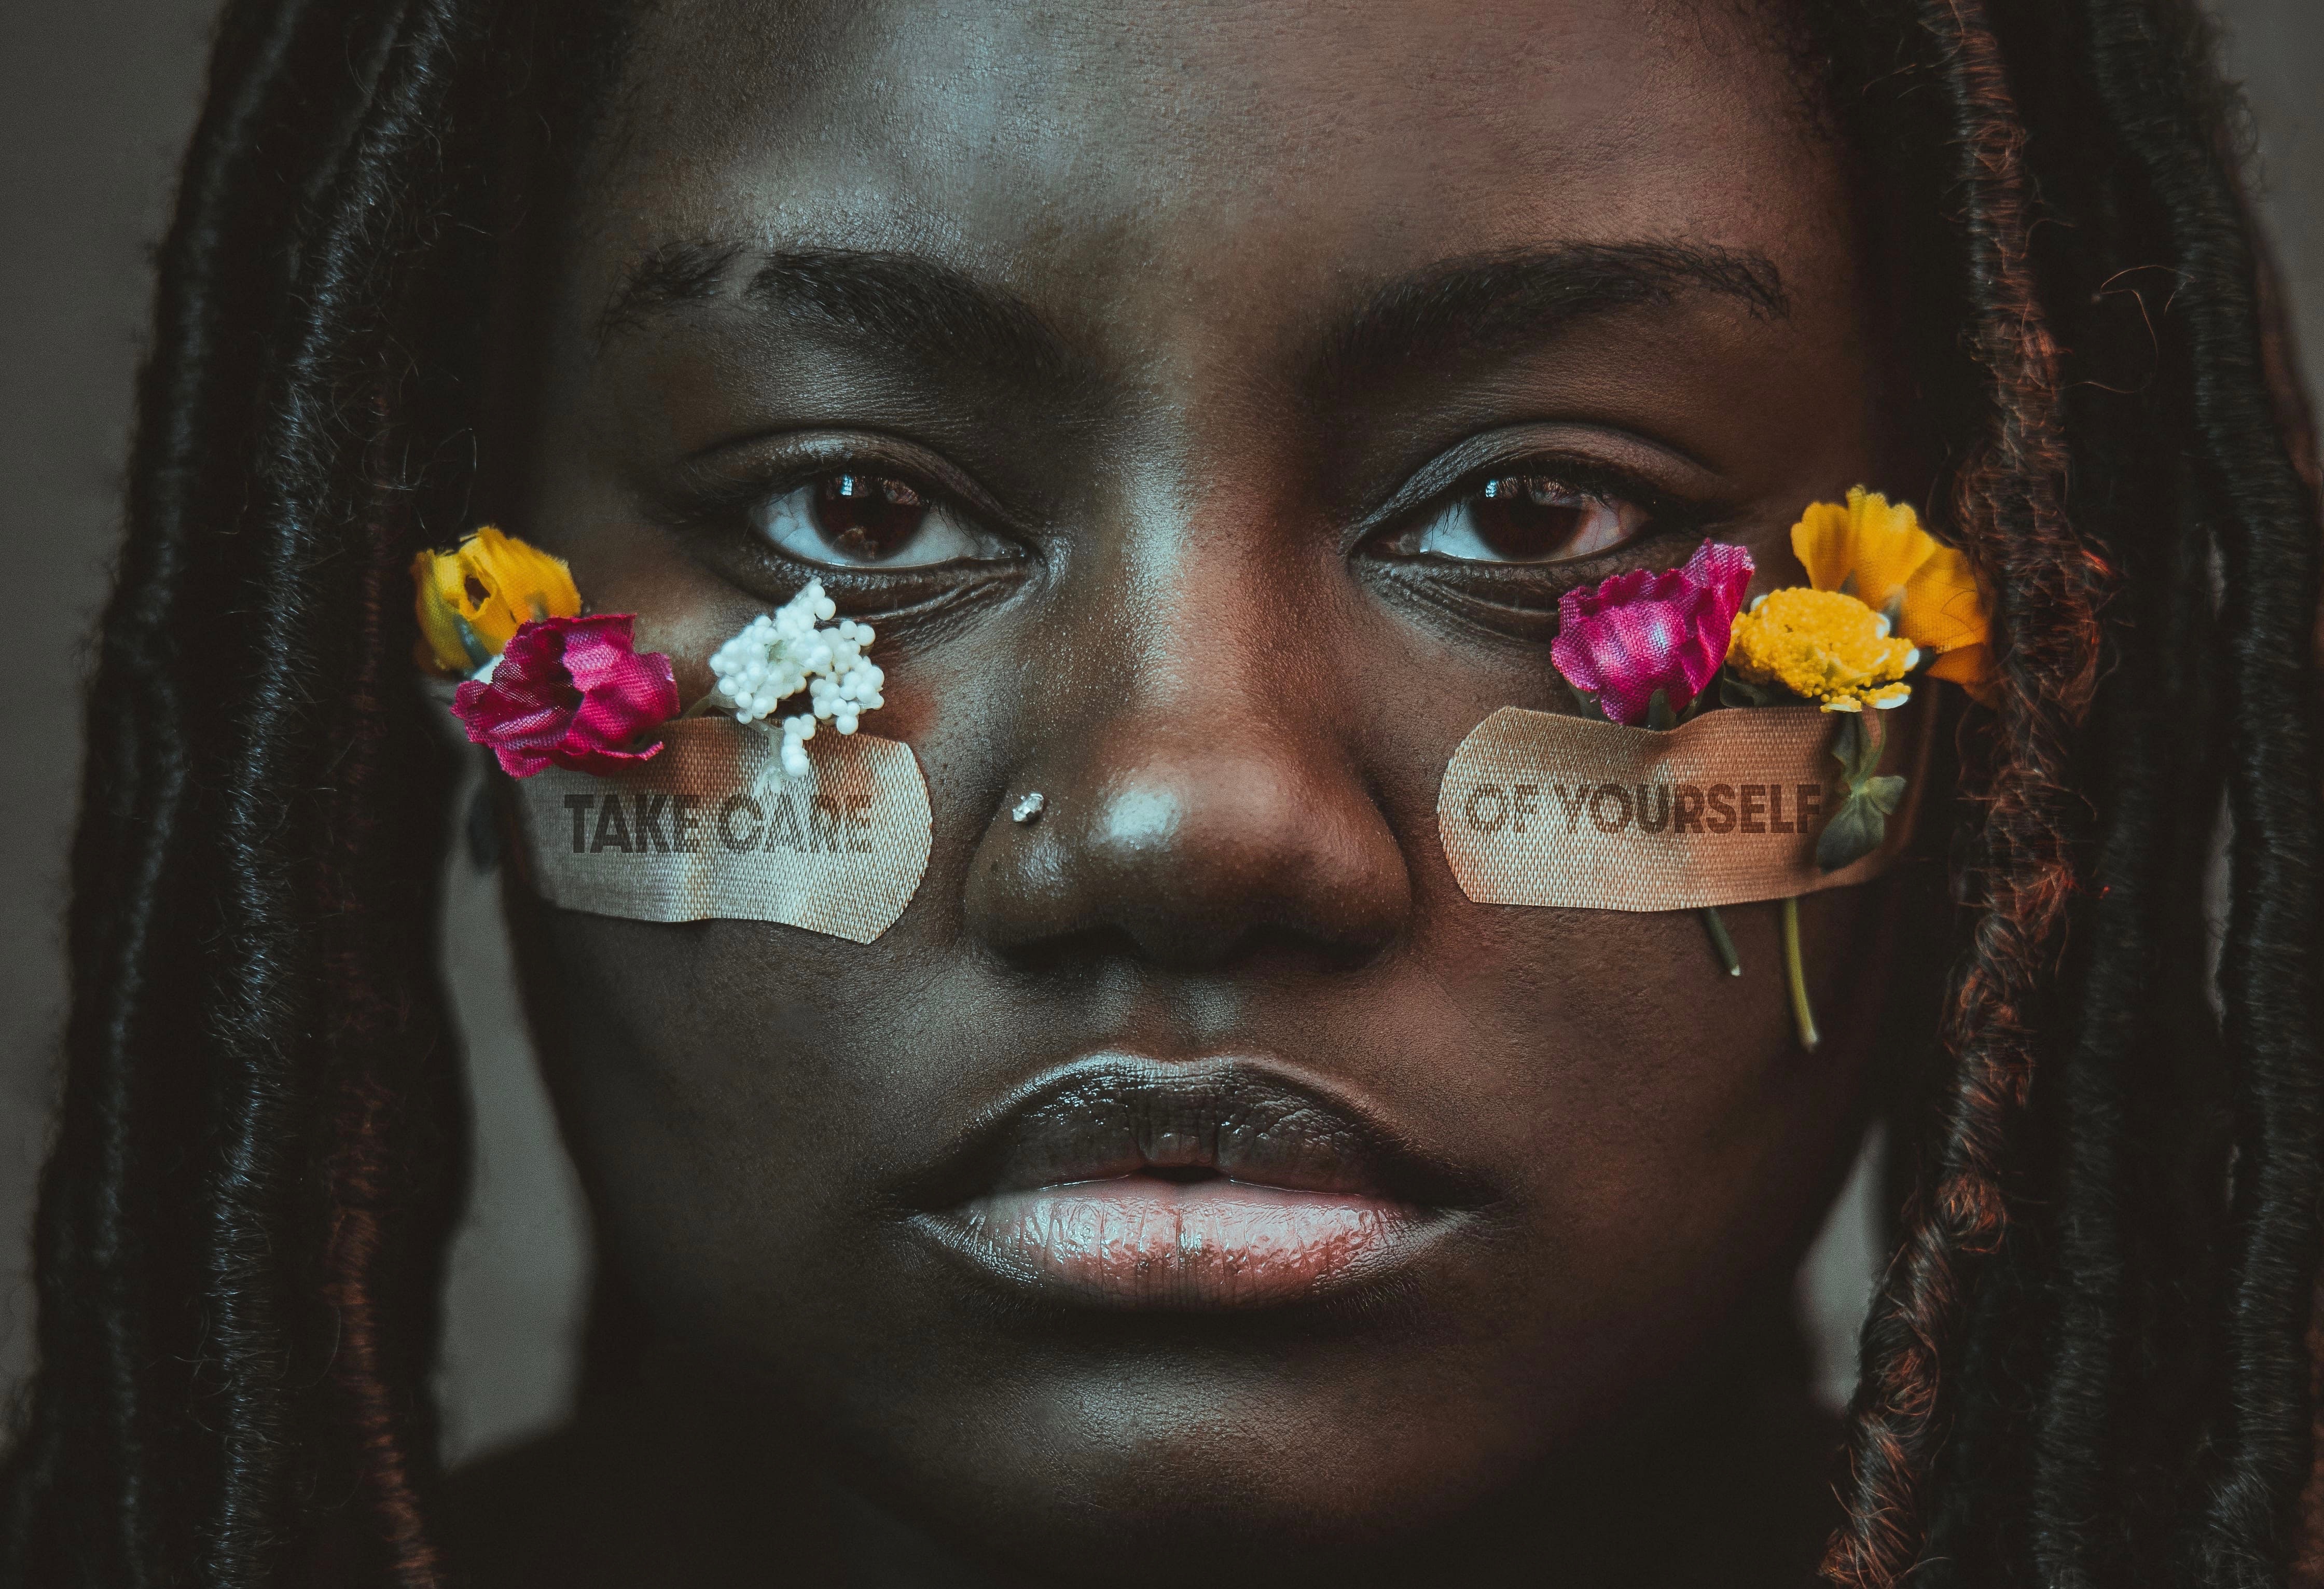 Close-up of a Black woman face with two bandaids holding flowers stuck under her eyes with the message "Take Care of Yourself" on the Bandaids